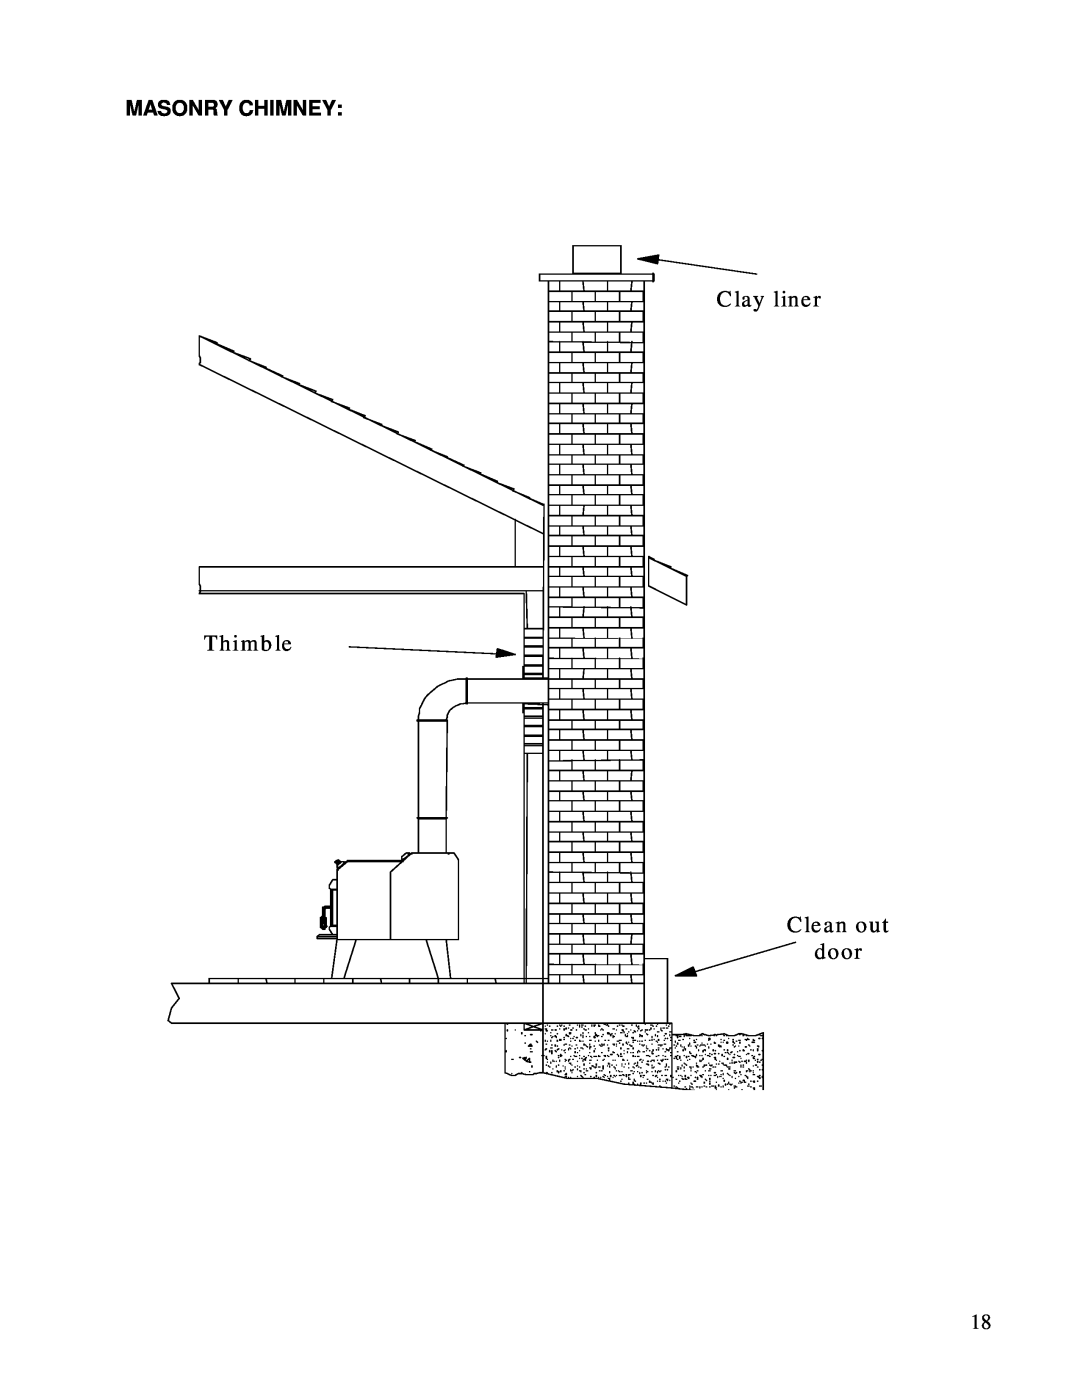 Drolet HT-1600, HT-2000 owner manual Thimb le, C lay liner C lean out door, Masonry Chimney 